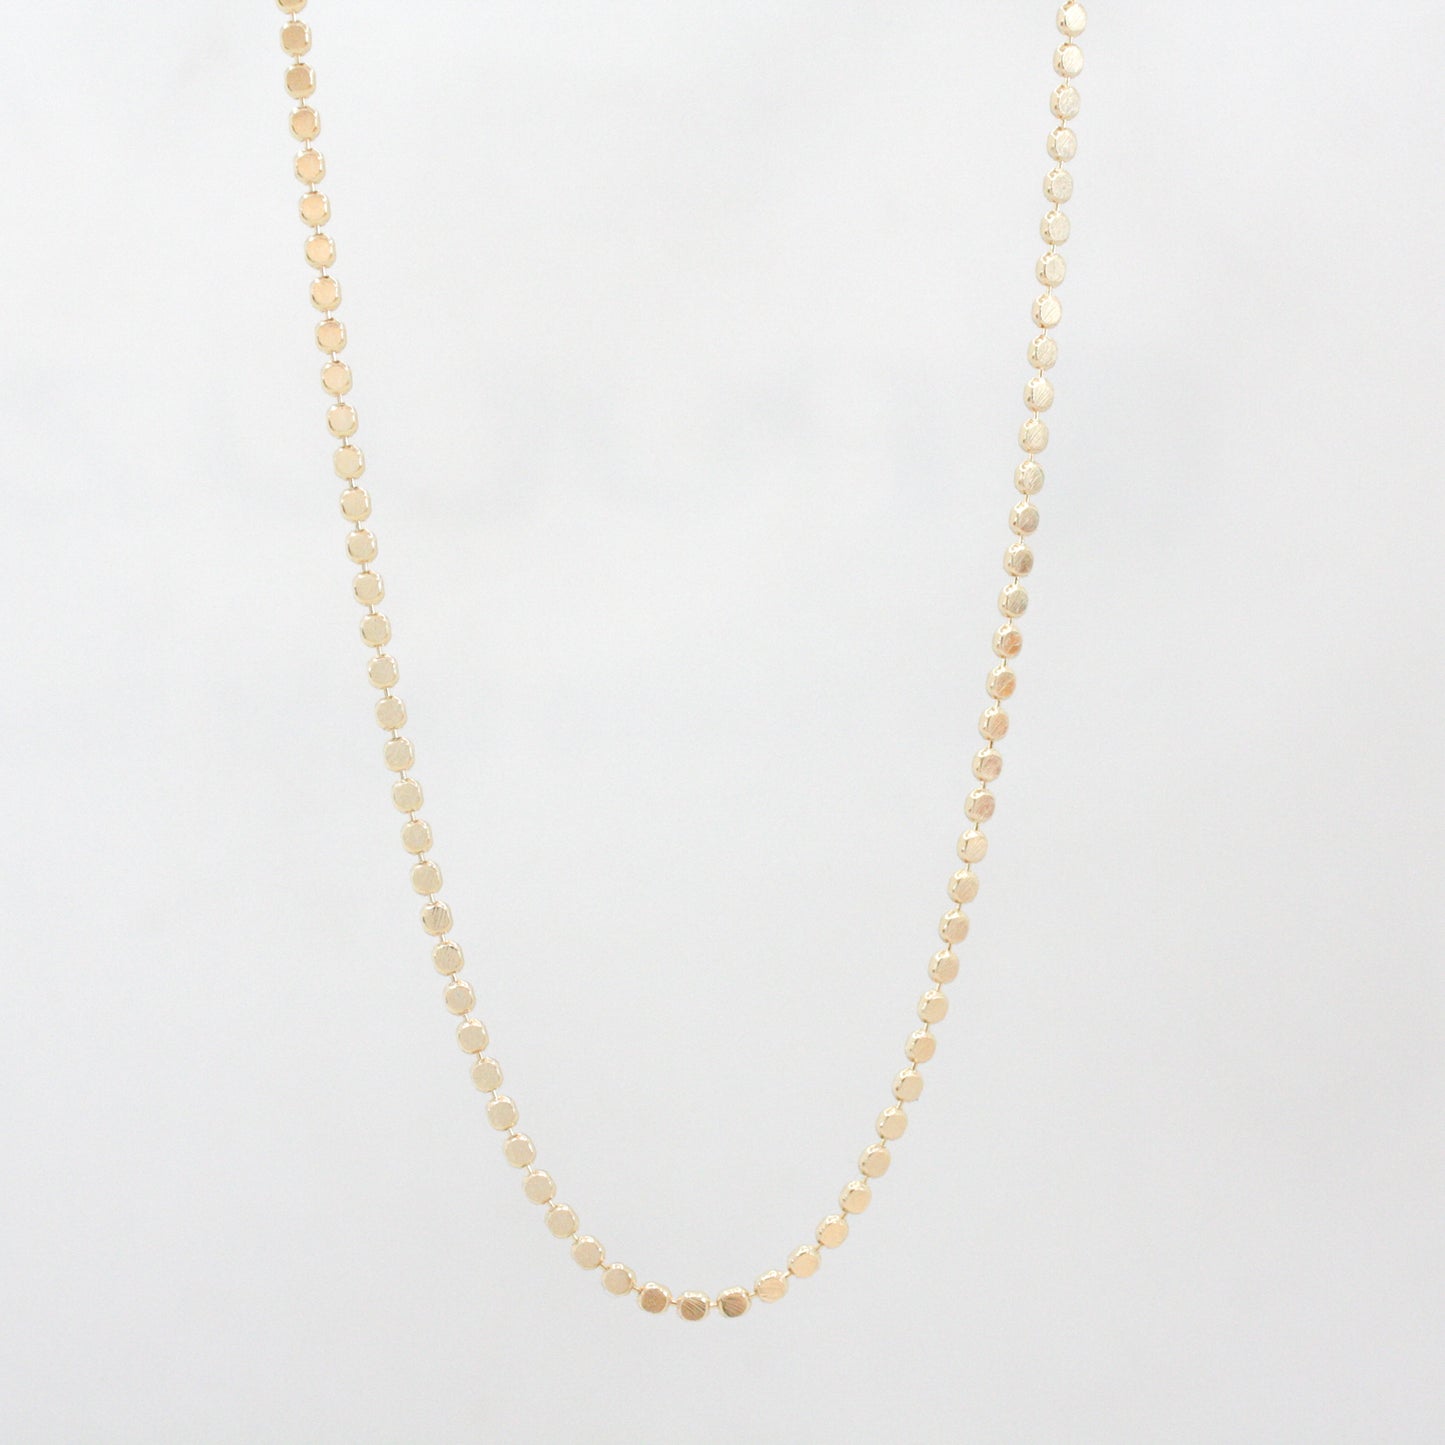 Waverly Dotted Necklace :: 18k Gold Filled